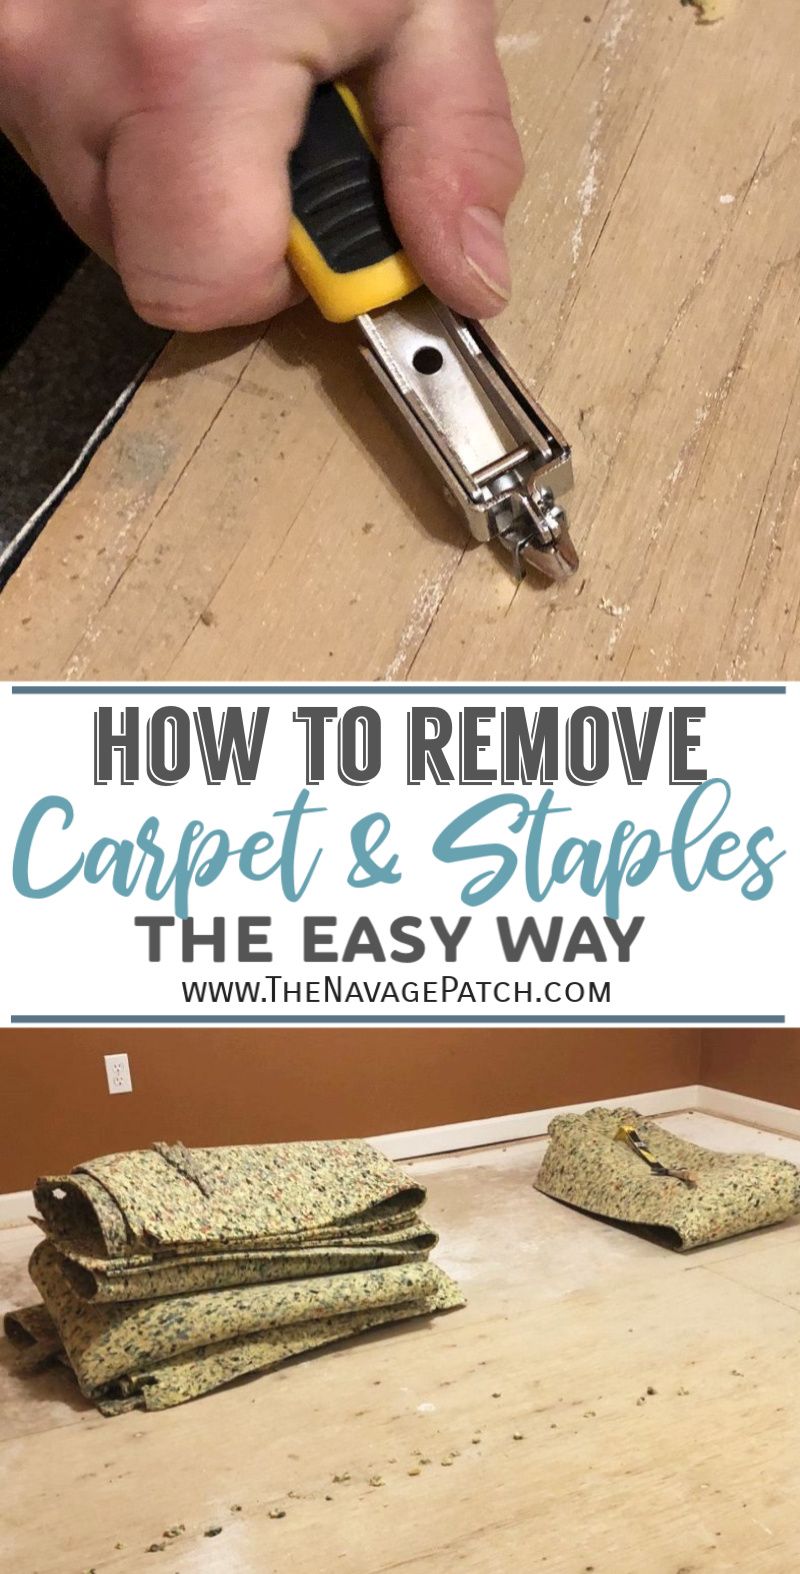 https://www.thenavagepatch.com/wp-content/uploads/2019/07/Carpet-Removal-and-other-Fun-Activities-Pin1-TNP.jpg